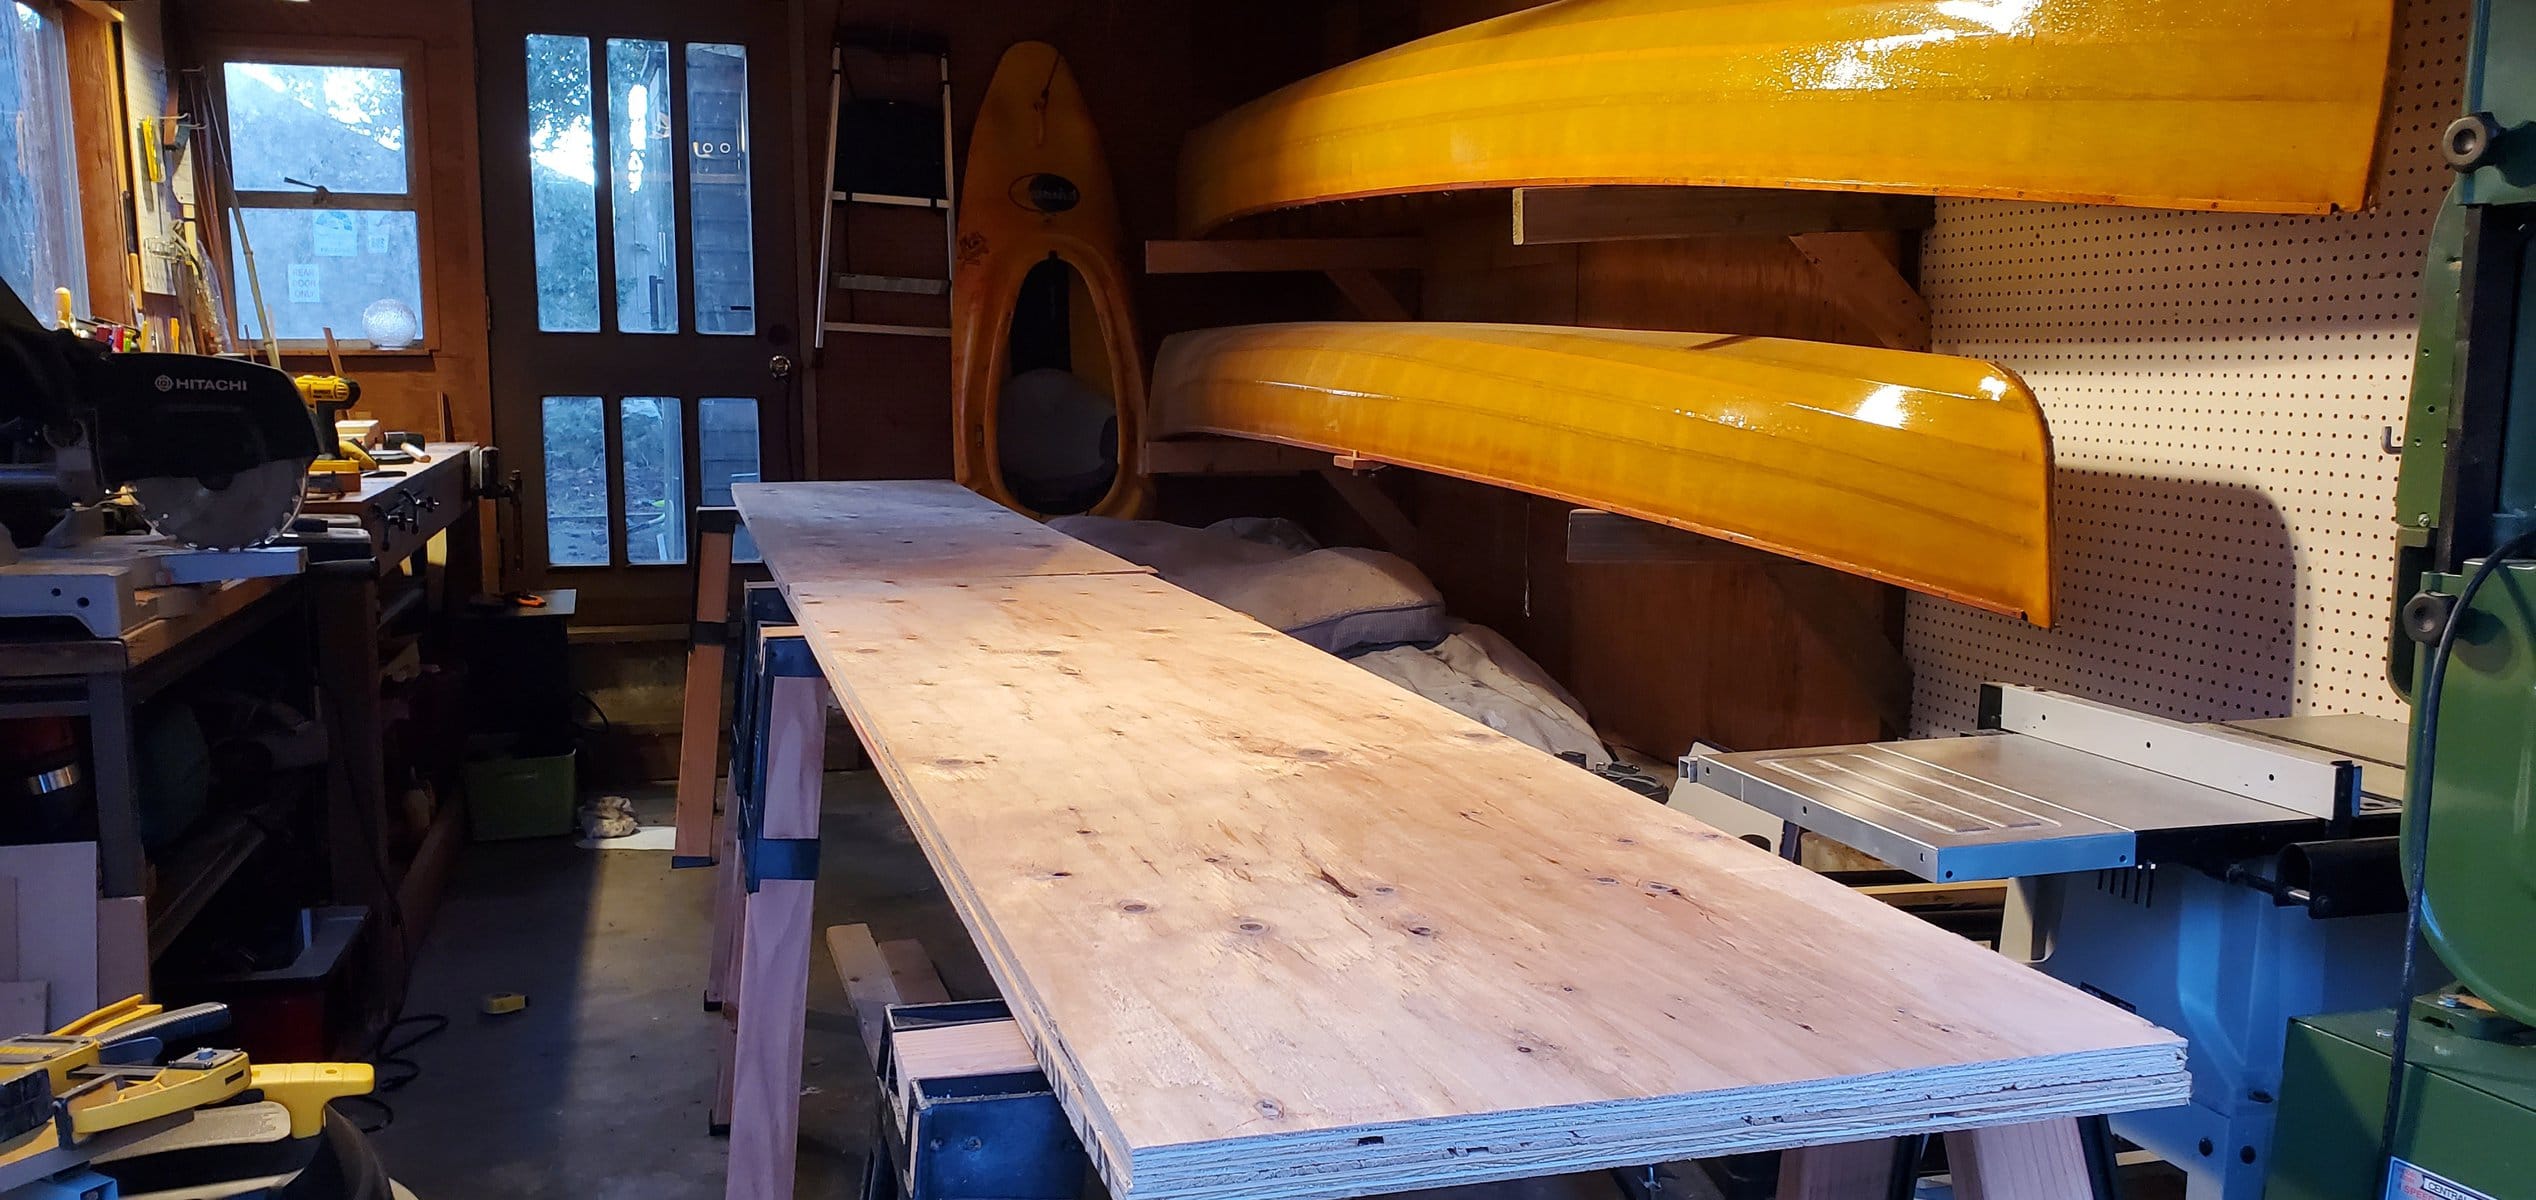 workbench with canoes